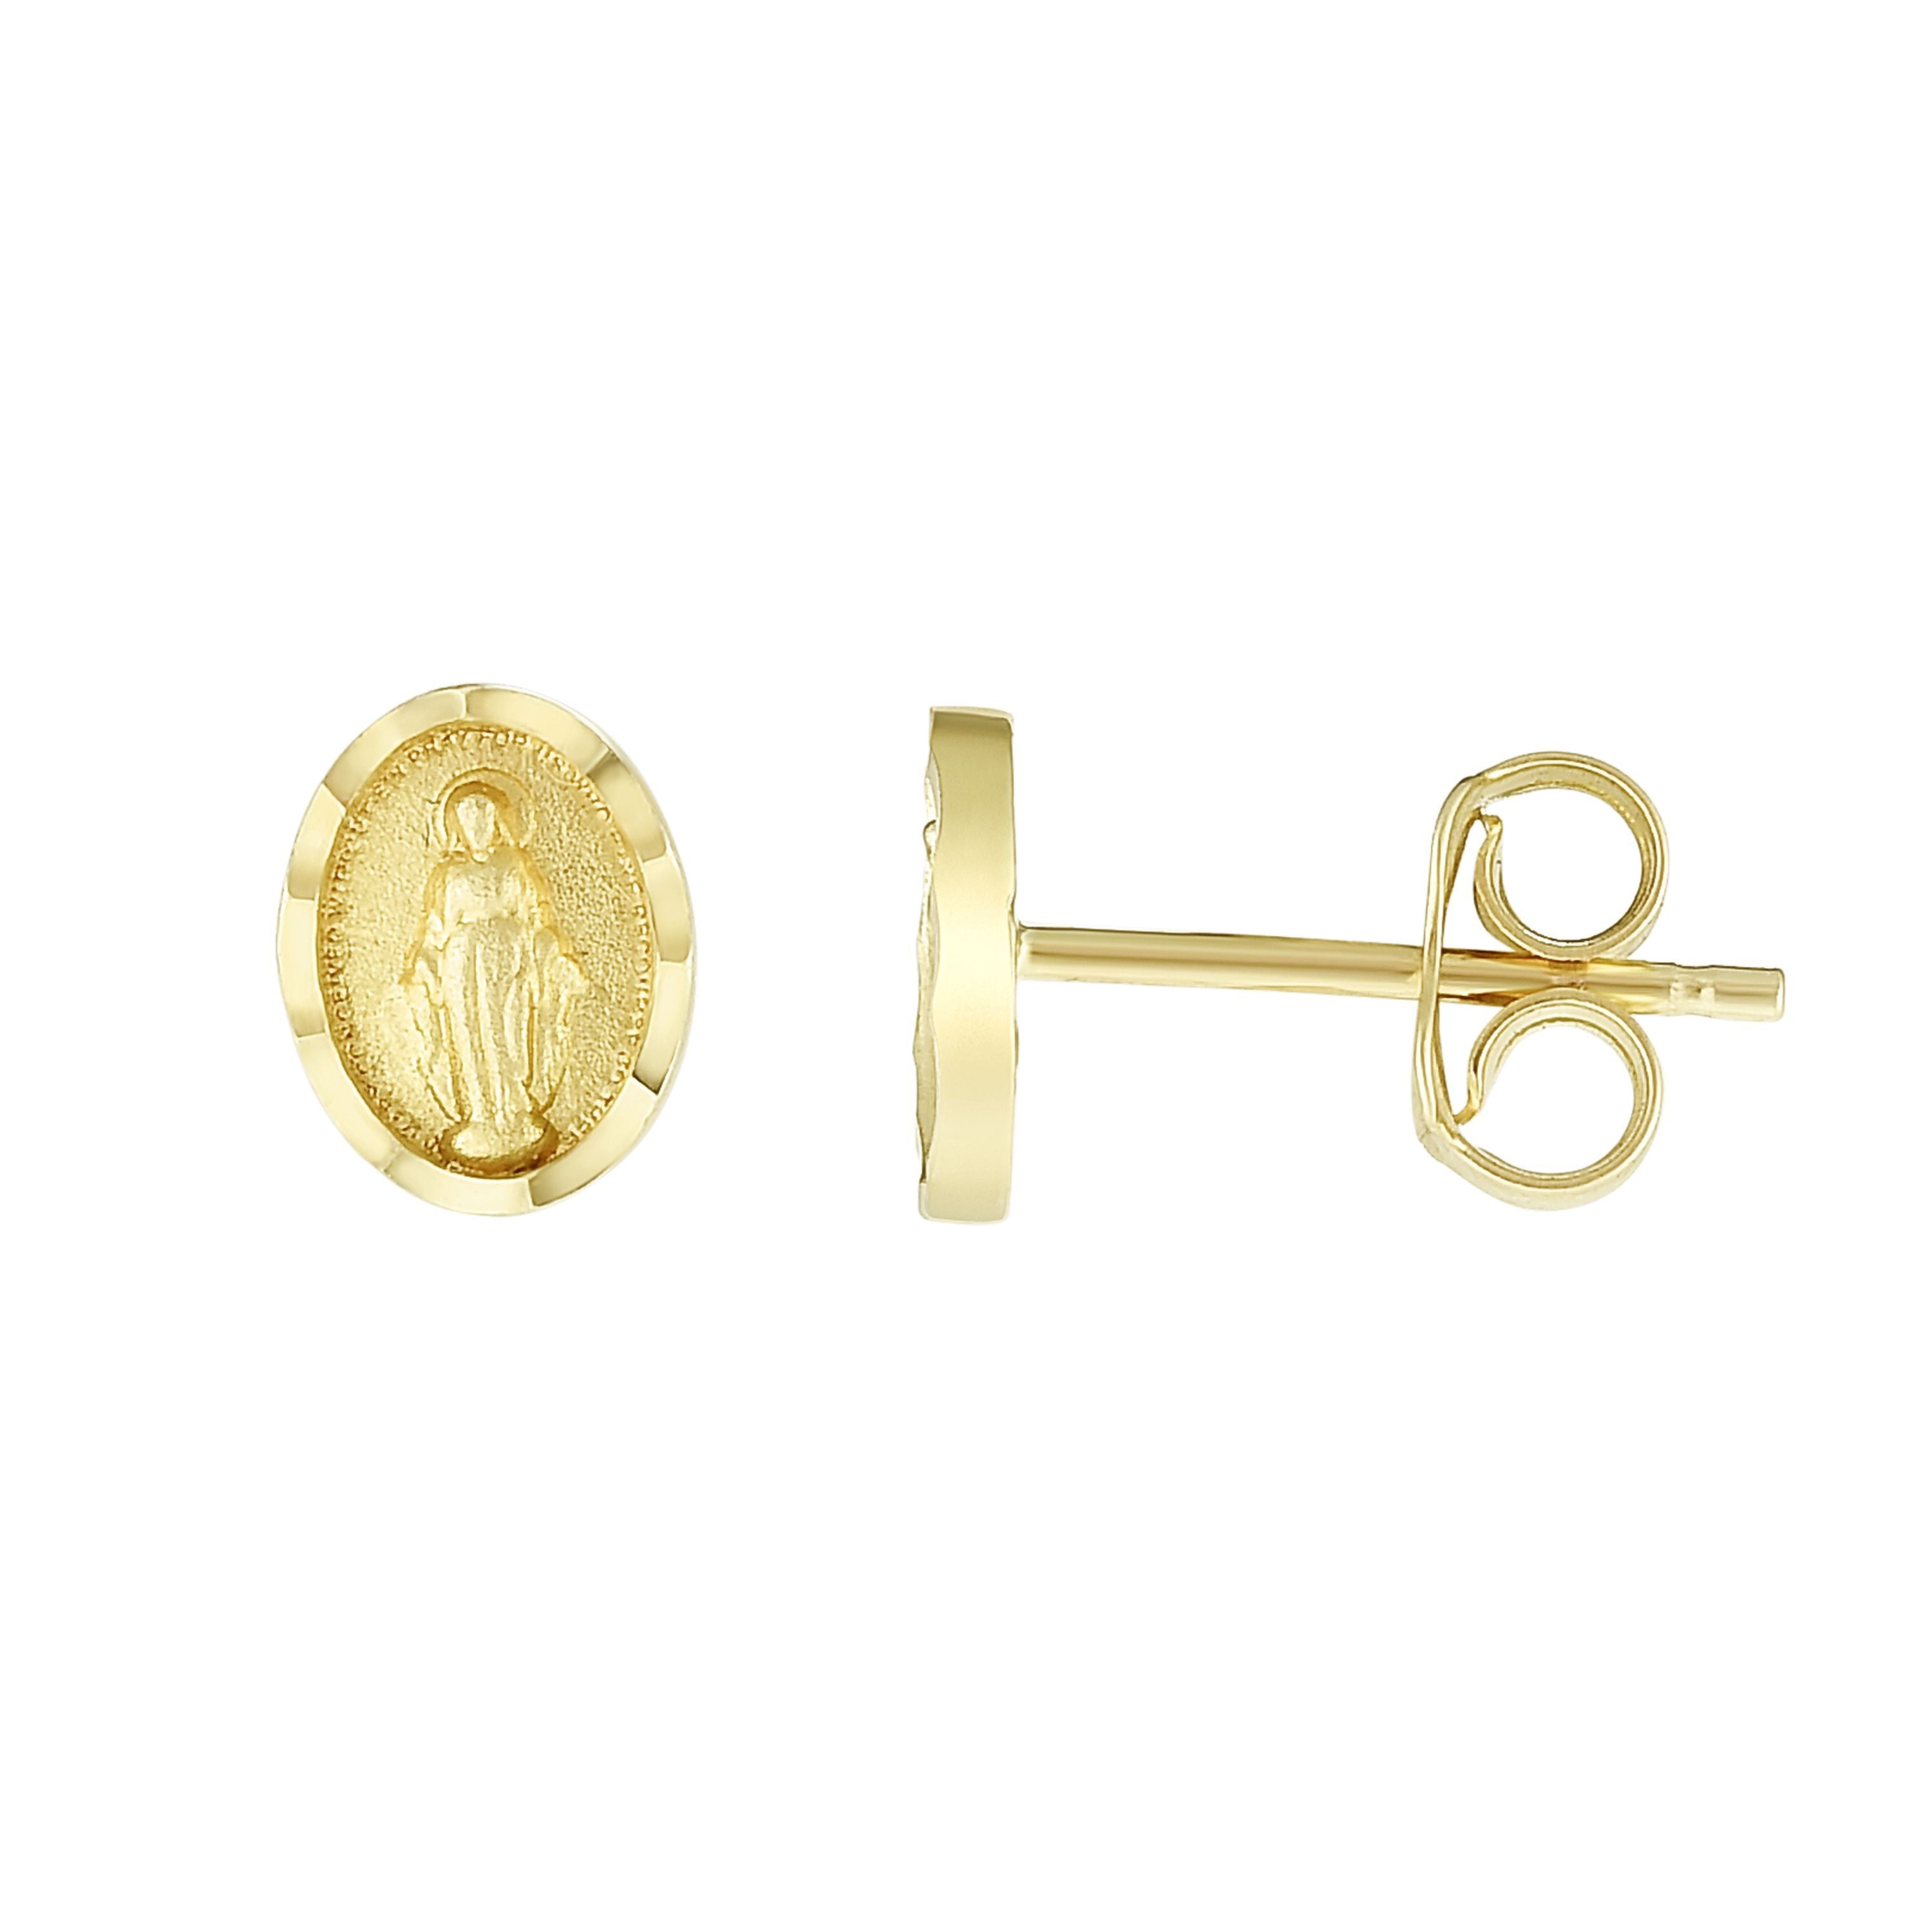 Minimalist Solid Gold Saint Mary Mother of God Post Push Back Earrings made of 14k Yellow Gold - wingroupjewelry